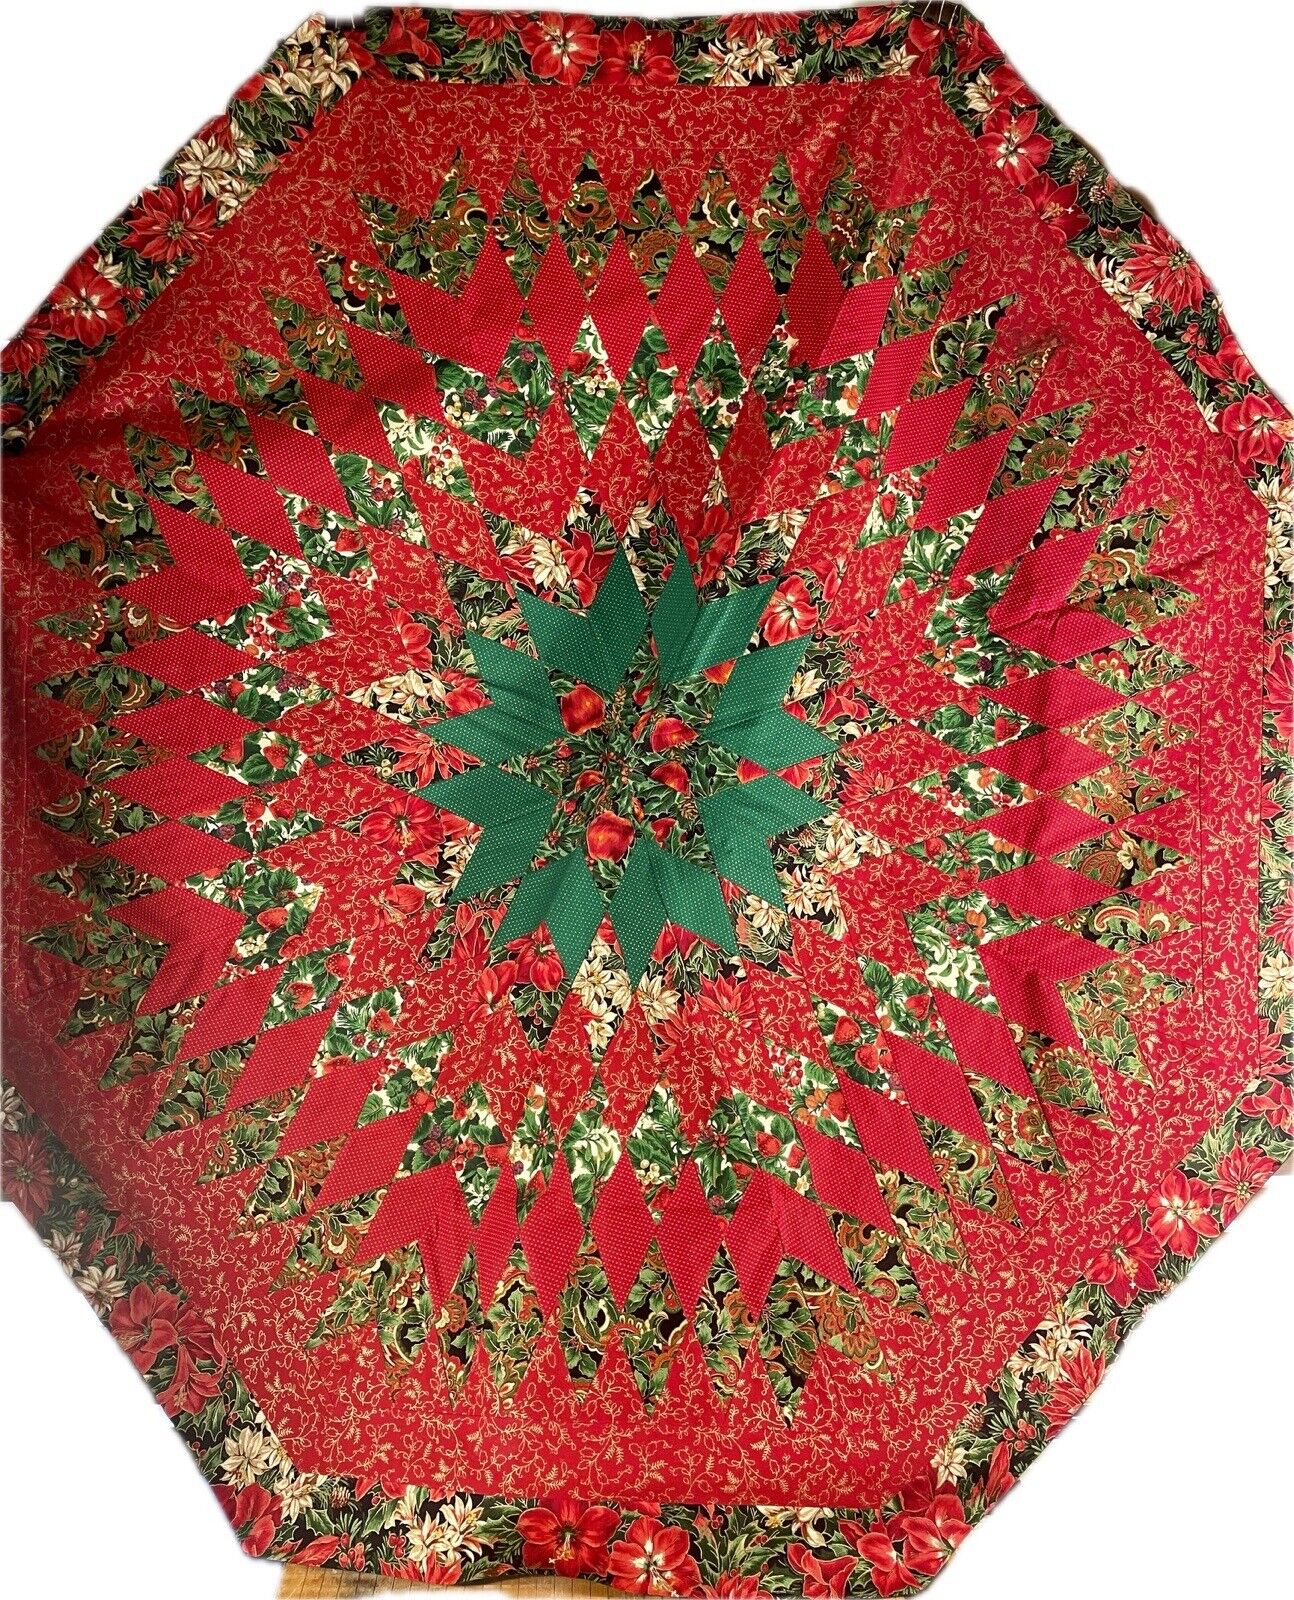 49” Vintage Christmas Tree Skirt Handmade Patchwork Floral Tropical Abstract